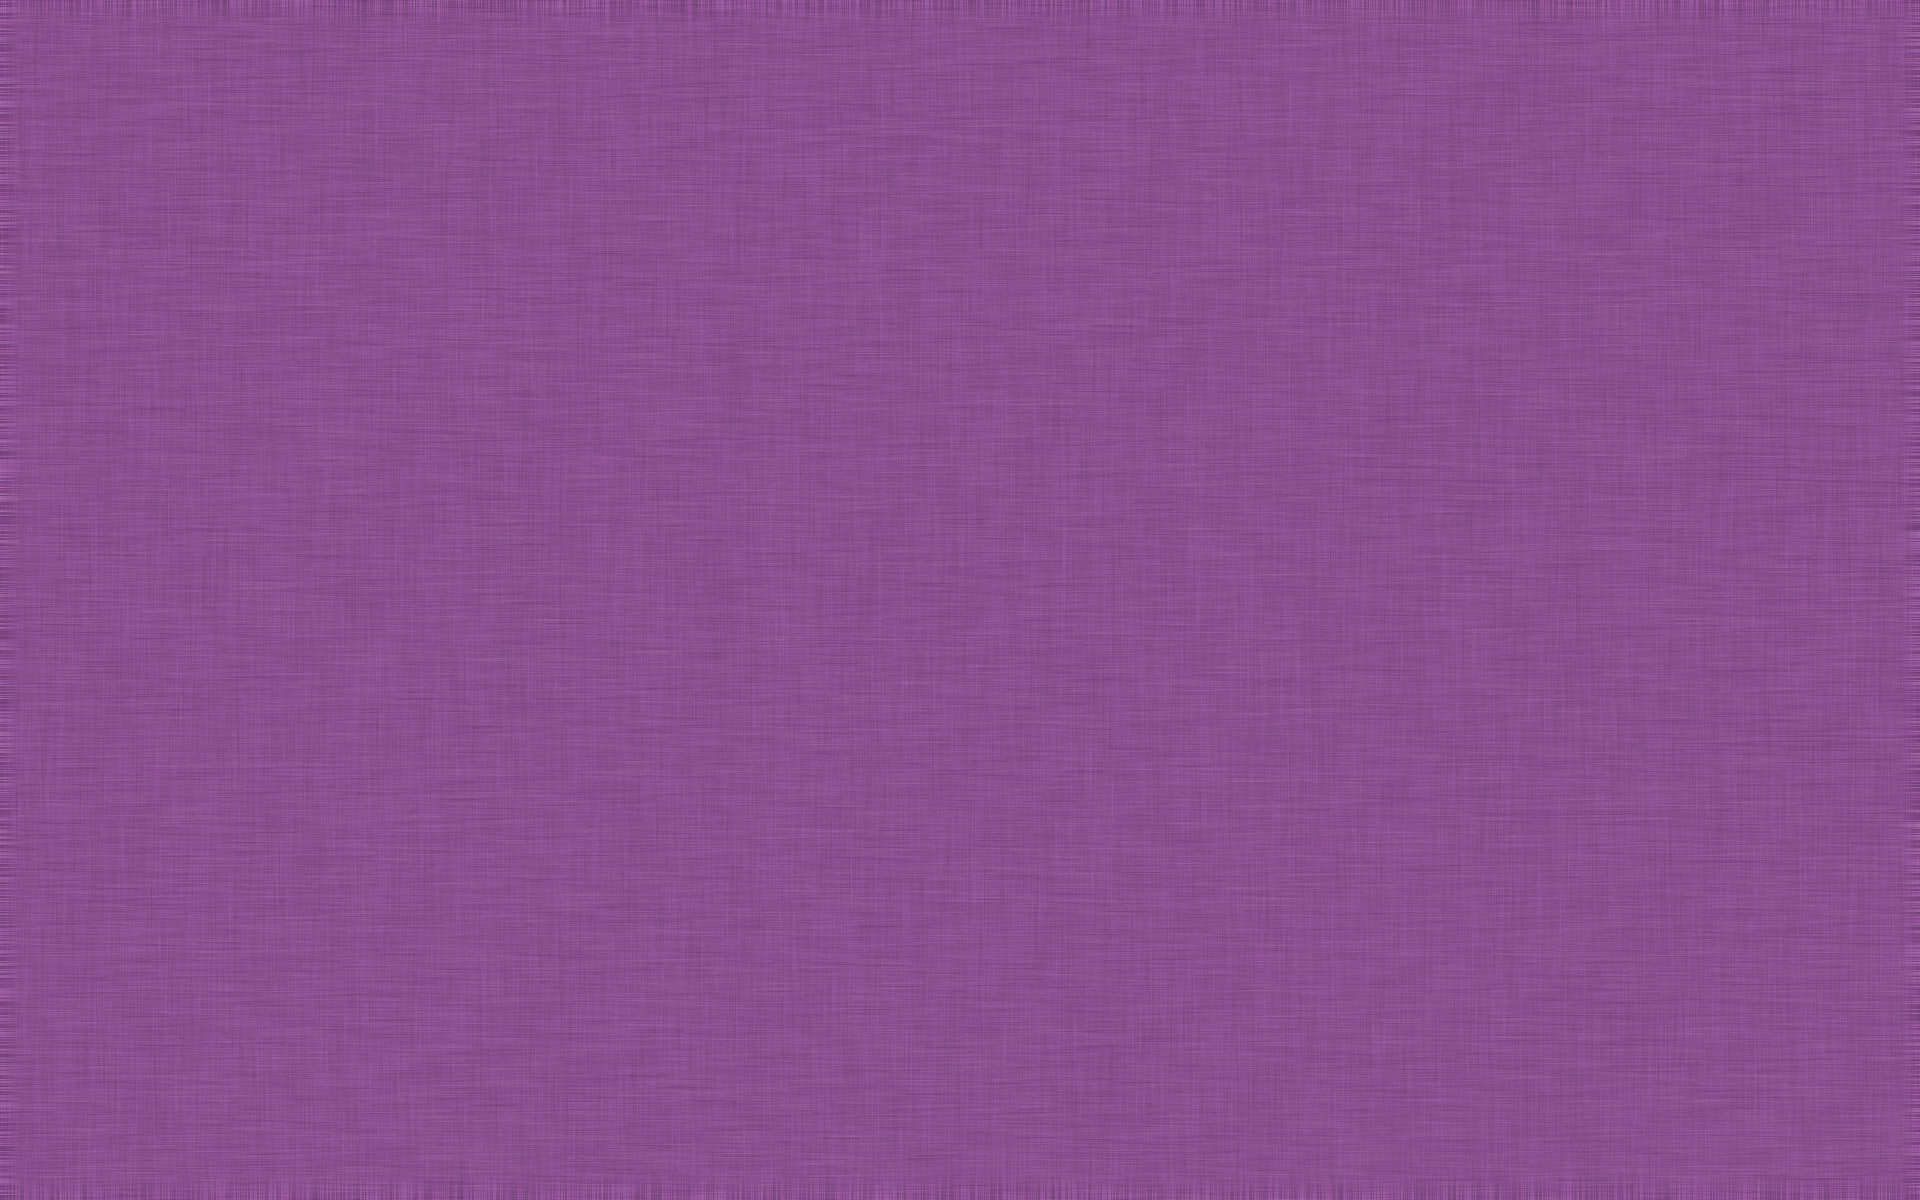 Displaying 18 Images For   Light Purple And Pink Background